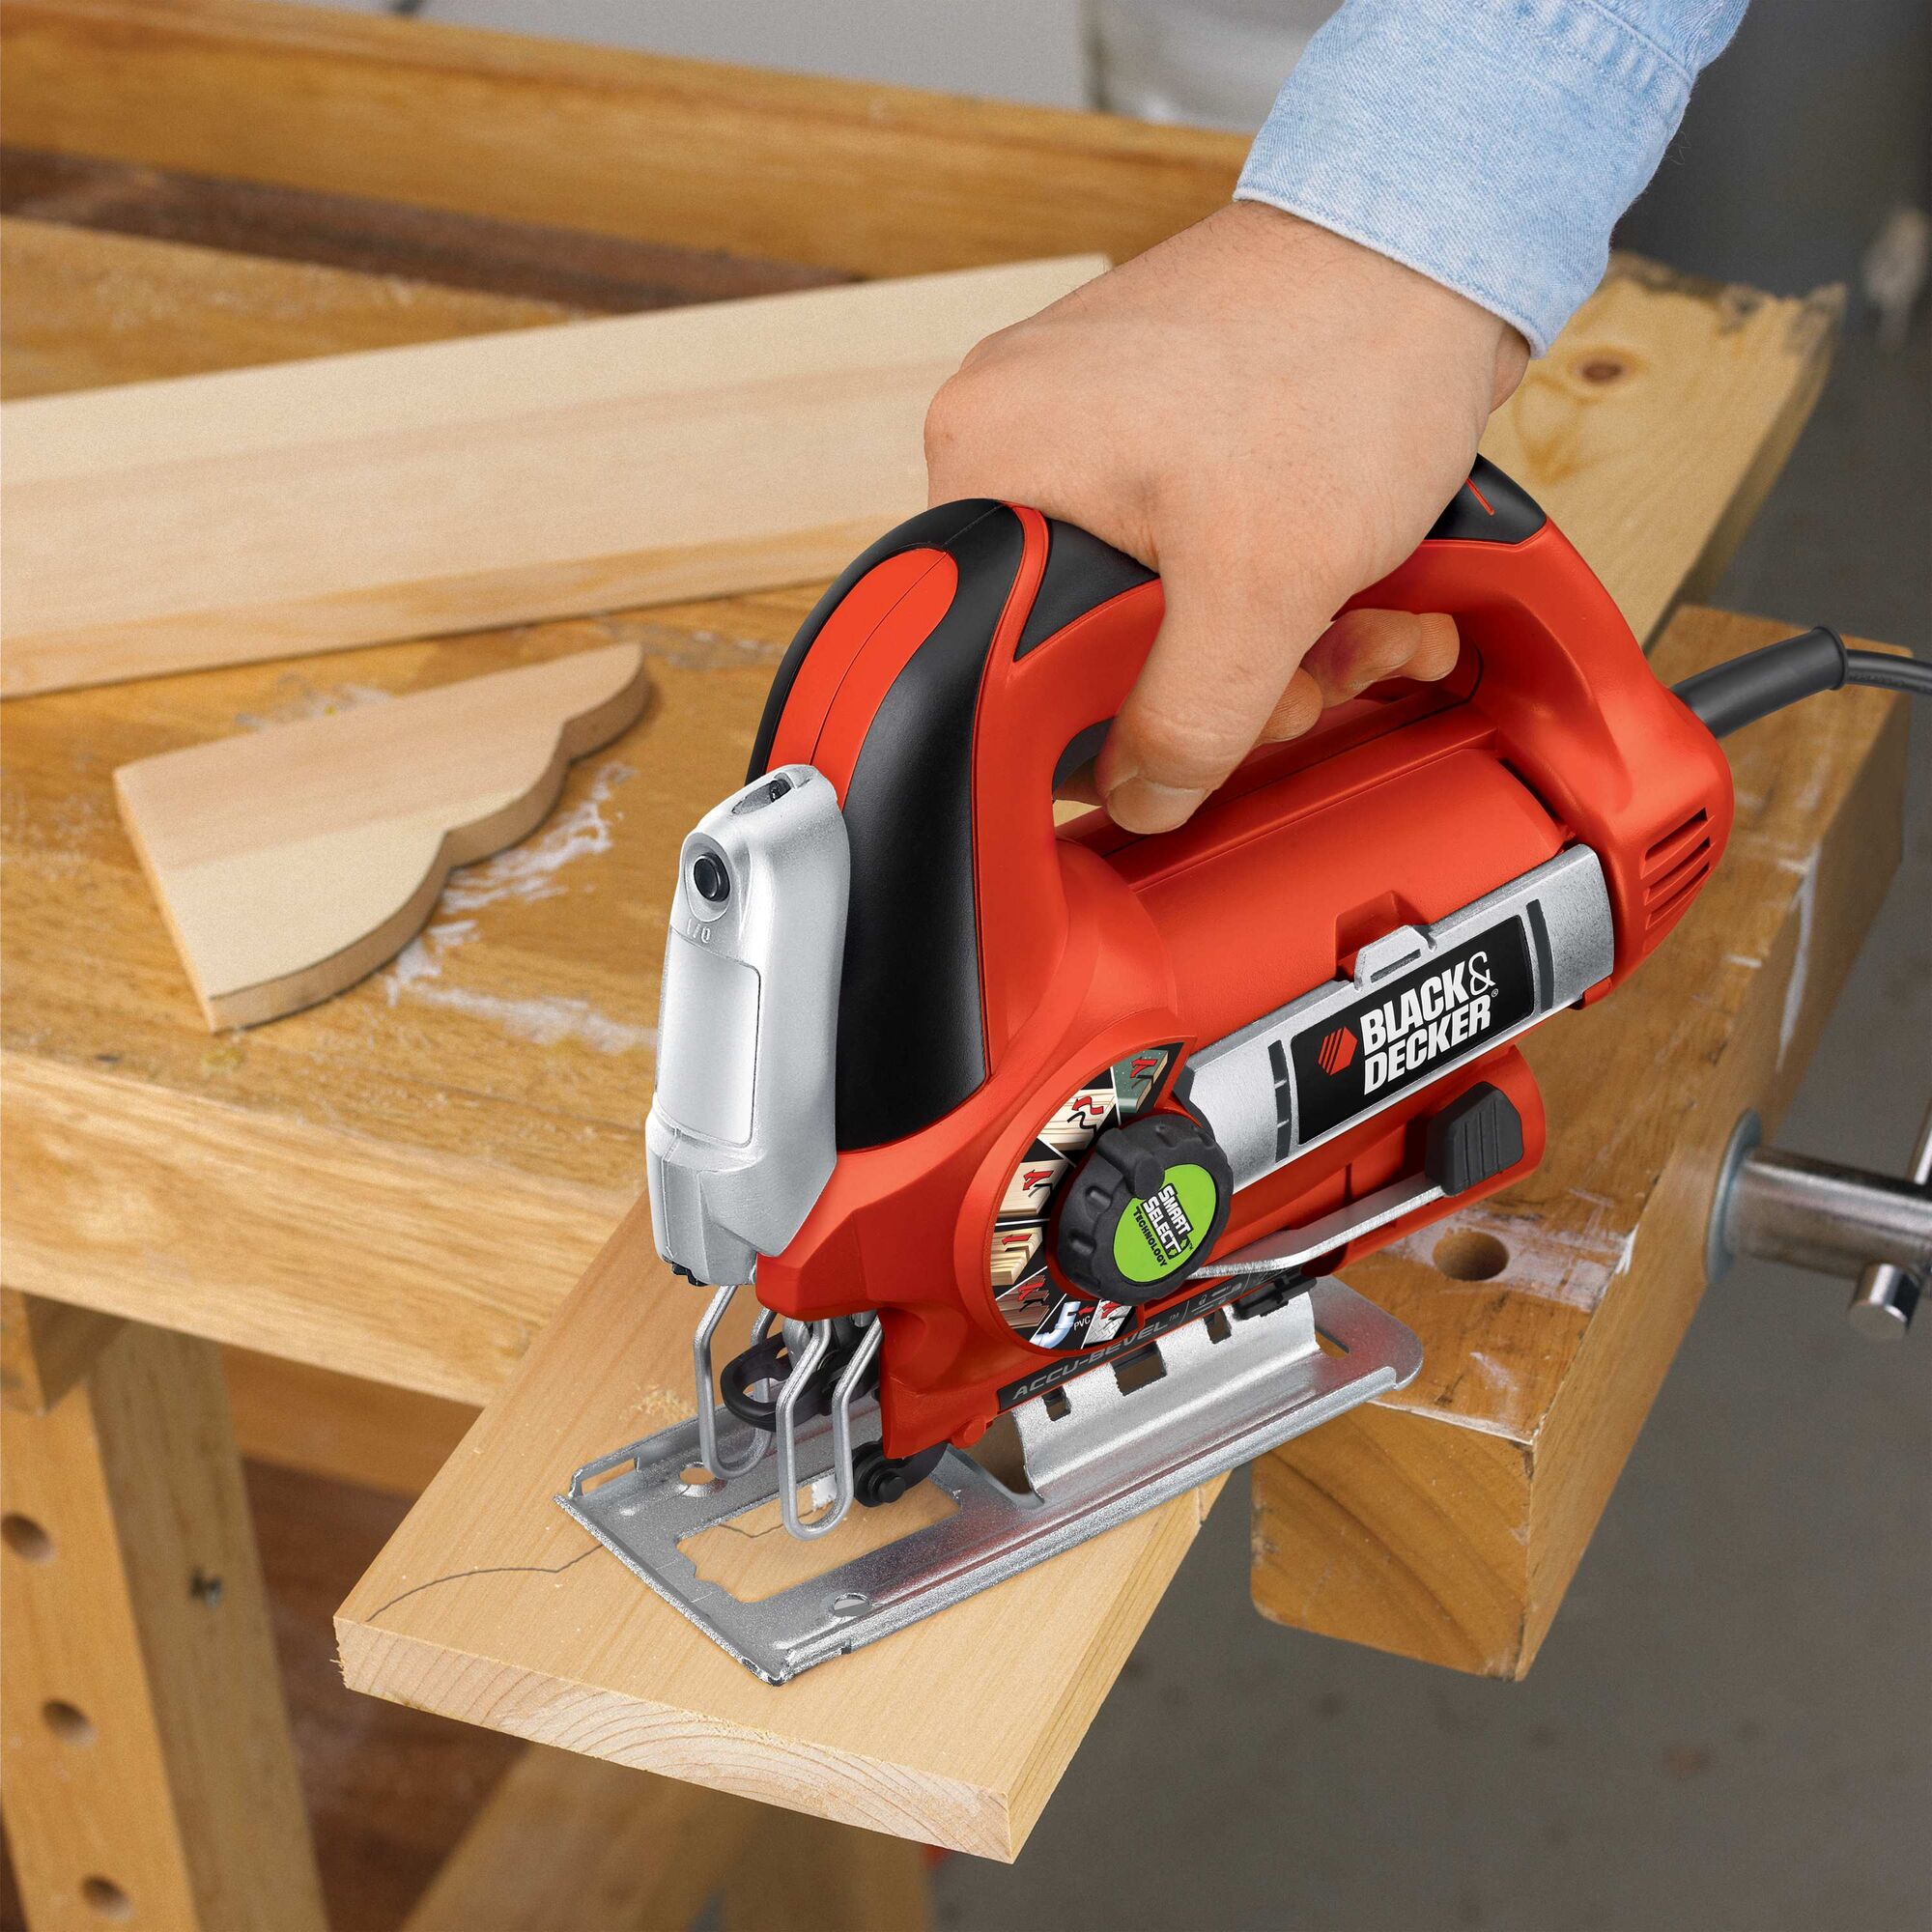 Linefinder 6 amp orbital jigsaw with smart select technology cutting wood.